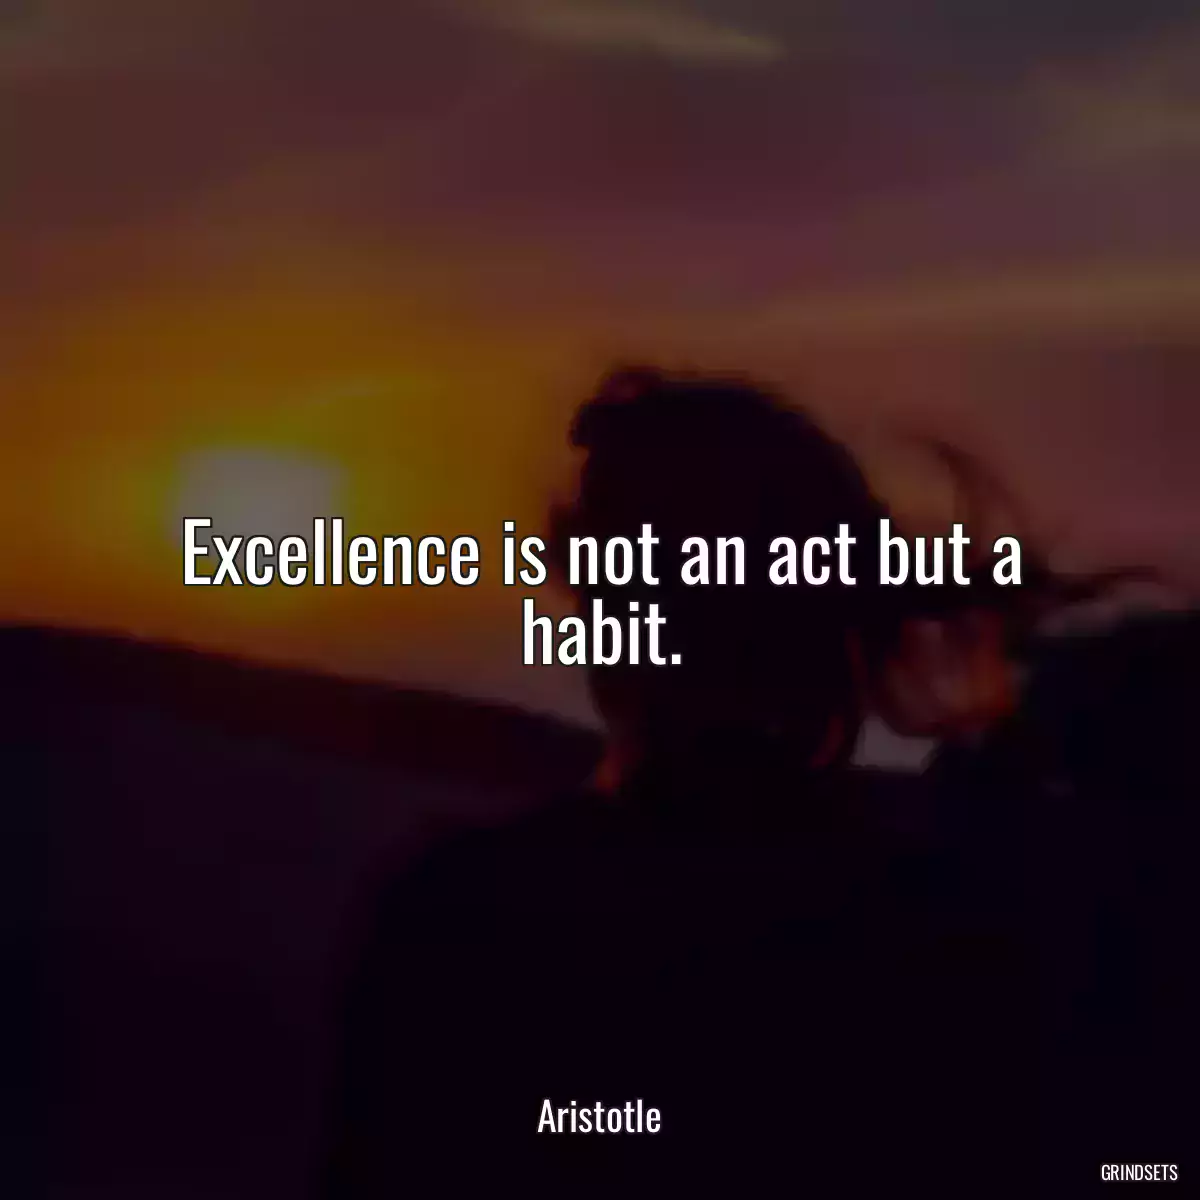 Excellence is not an act but a habit.